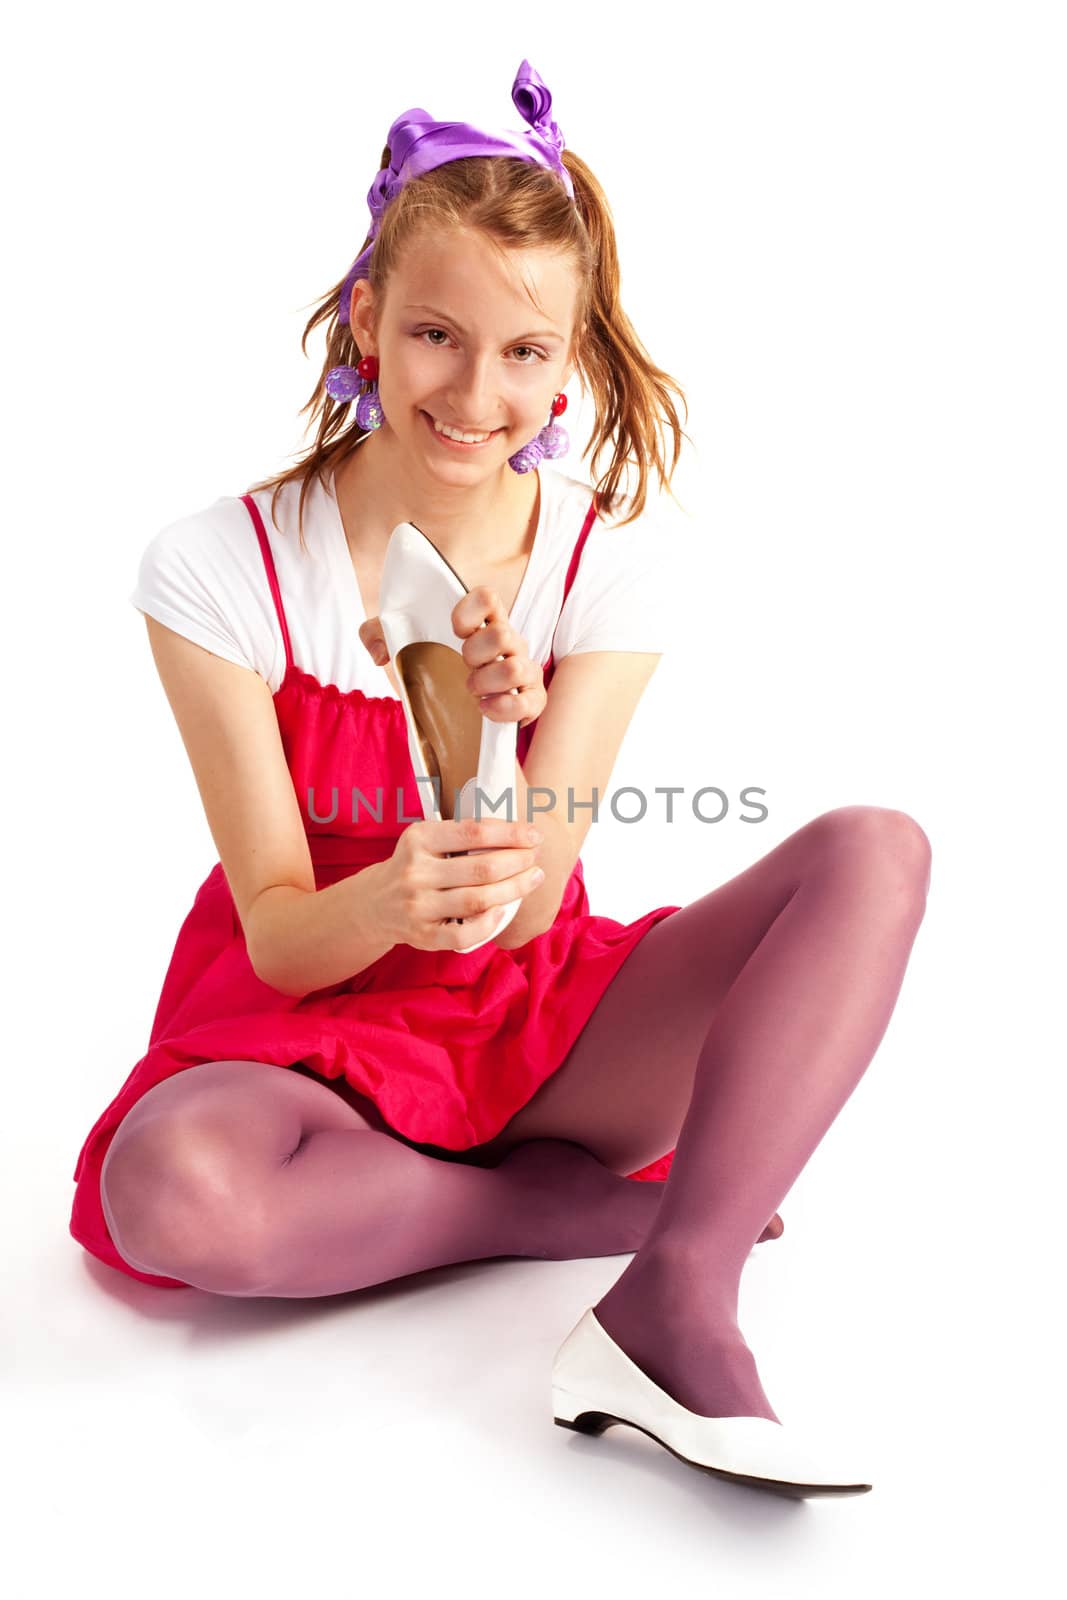 people series: young girl with white shoe